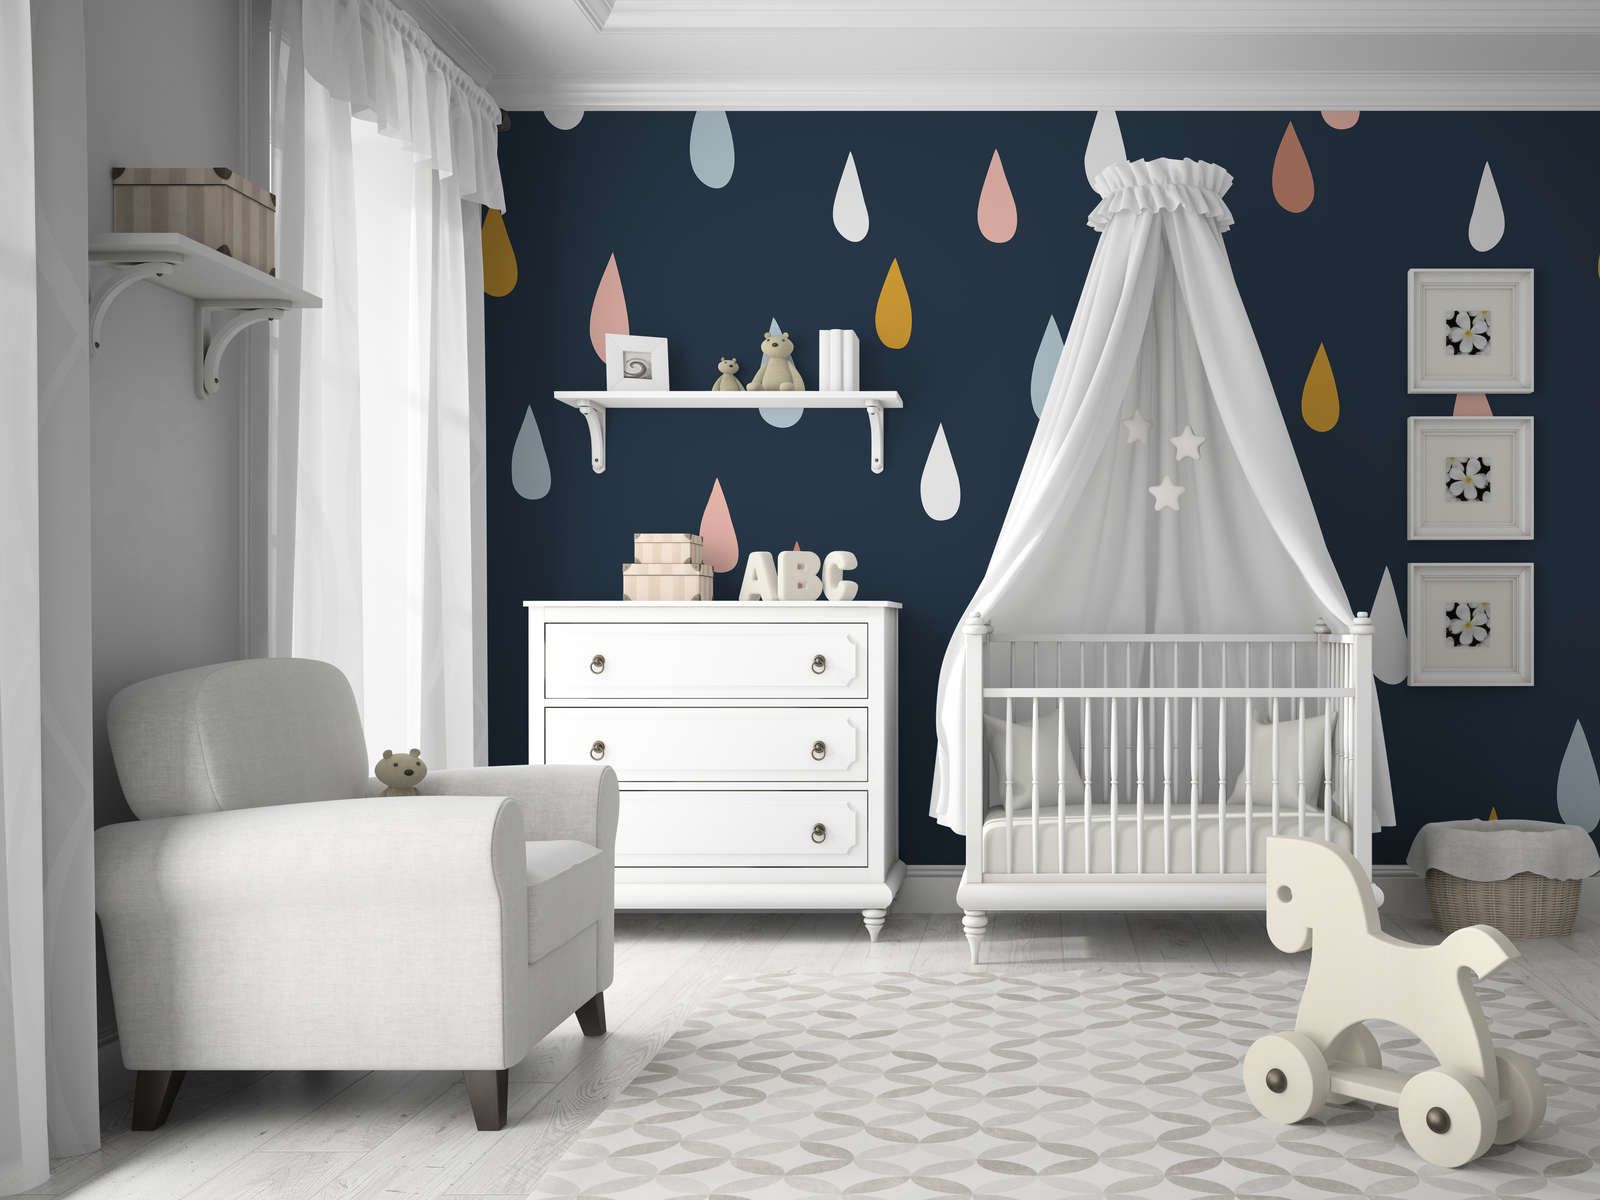             Photo wallpaper for children's room with colourful drops - Smooth & slightly shiny non-woven
        